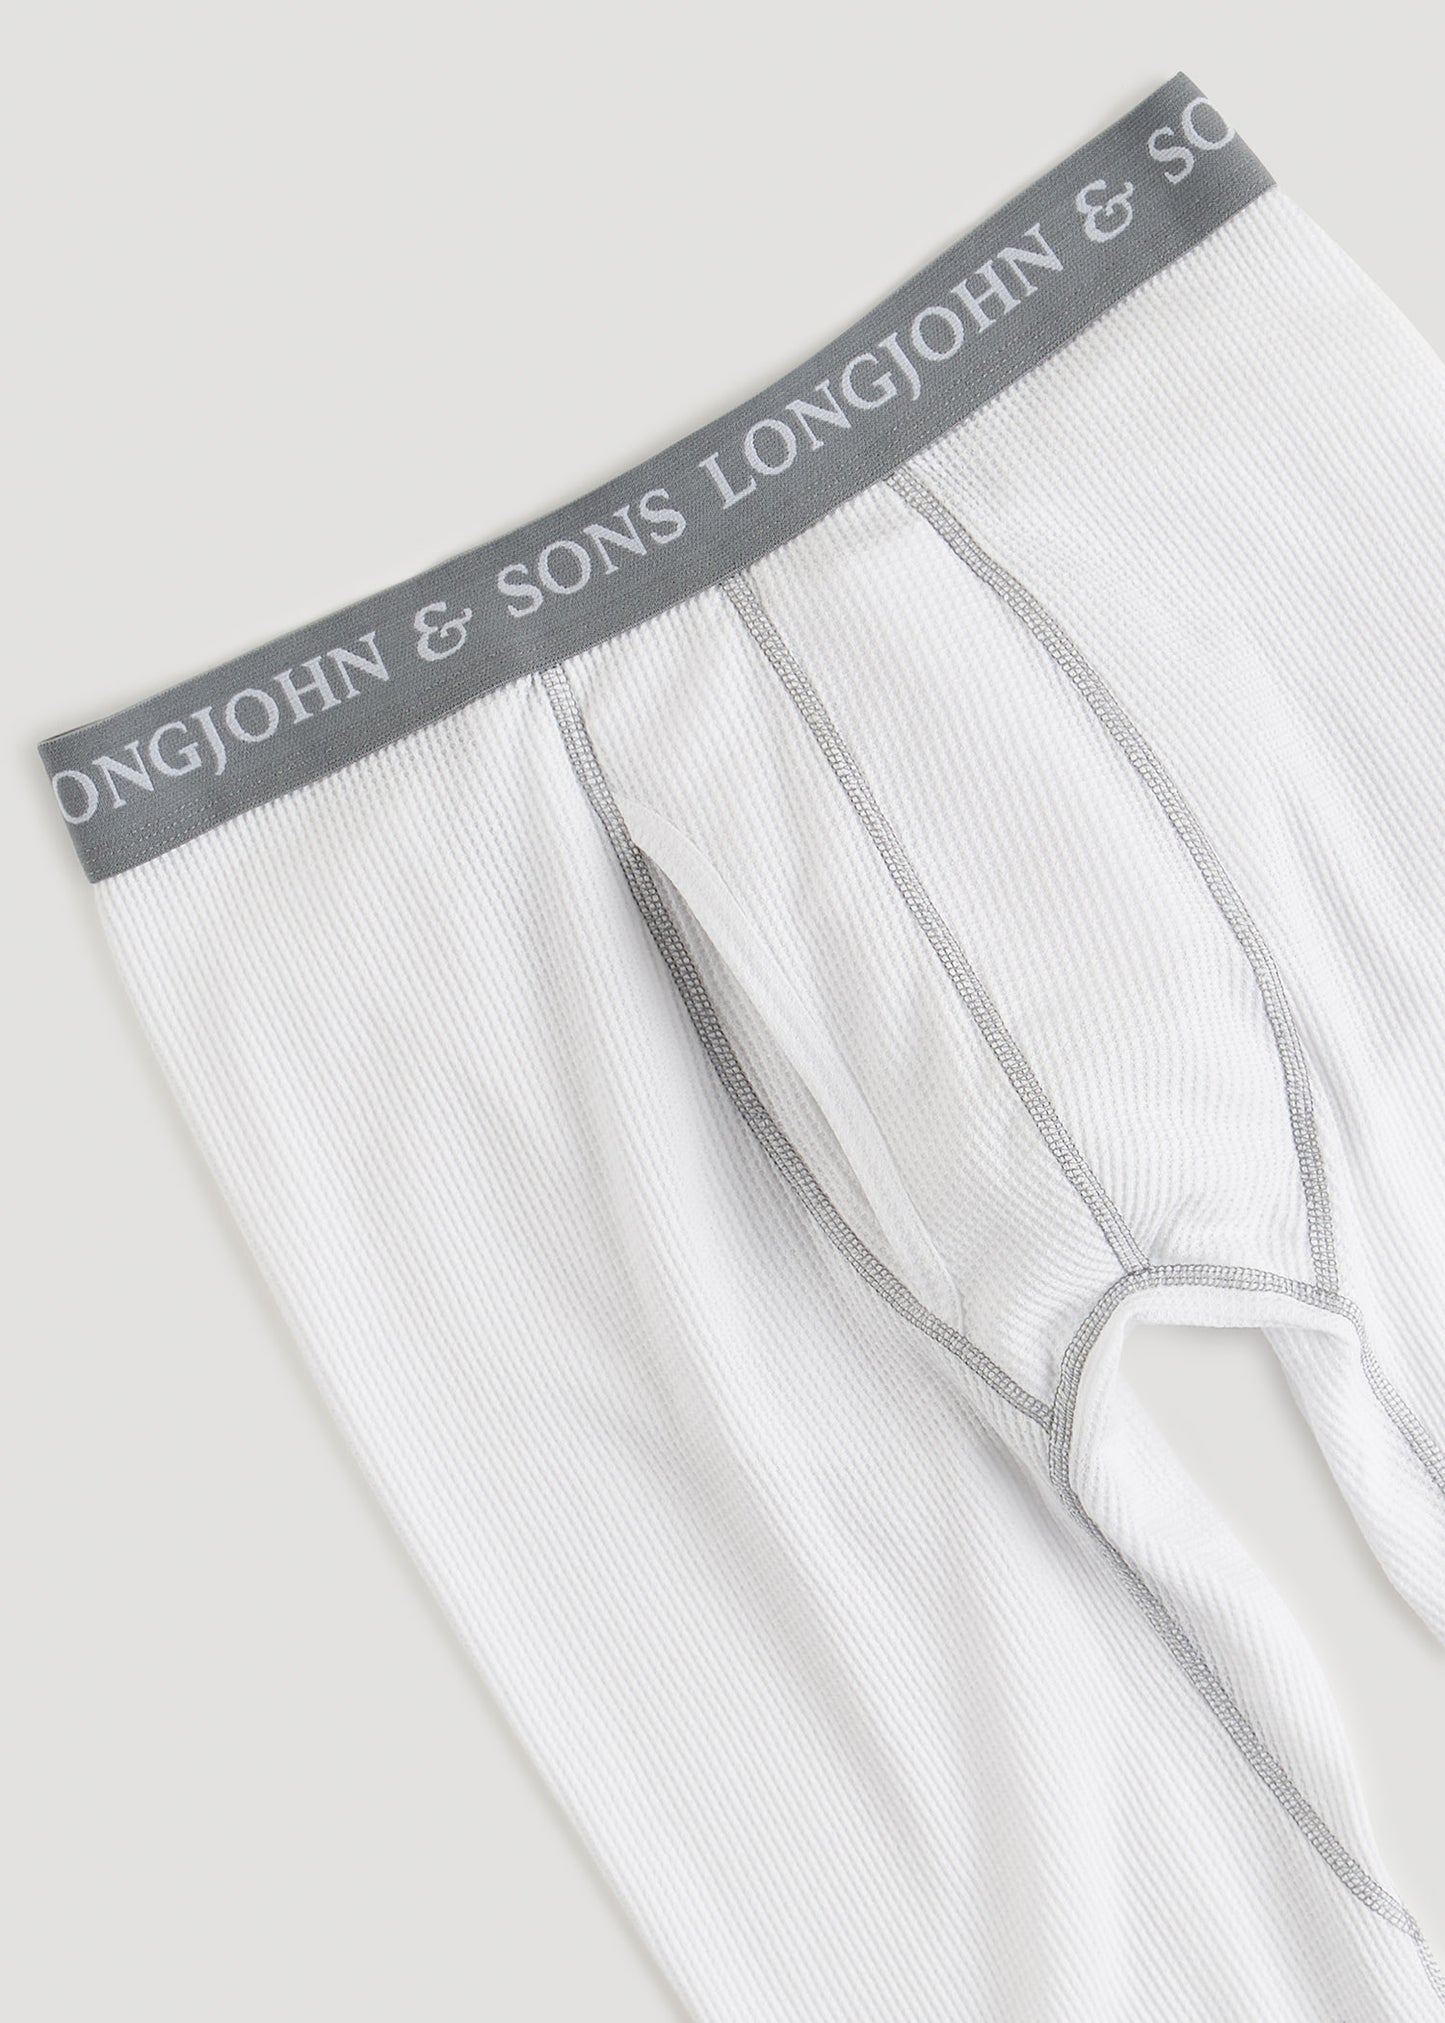 Private Johns Wants to Make the Best Big & Tall Underwear You've Ever Worn